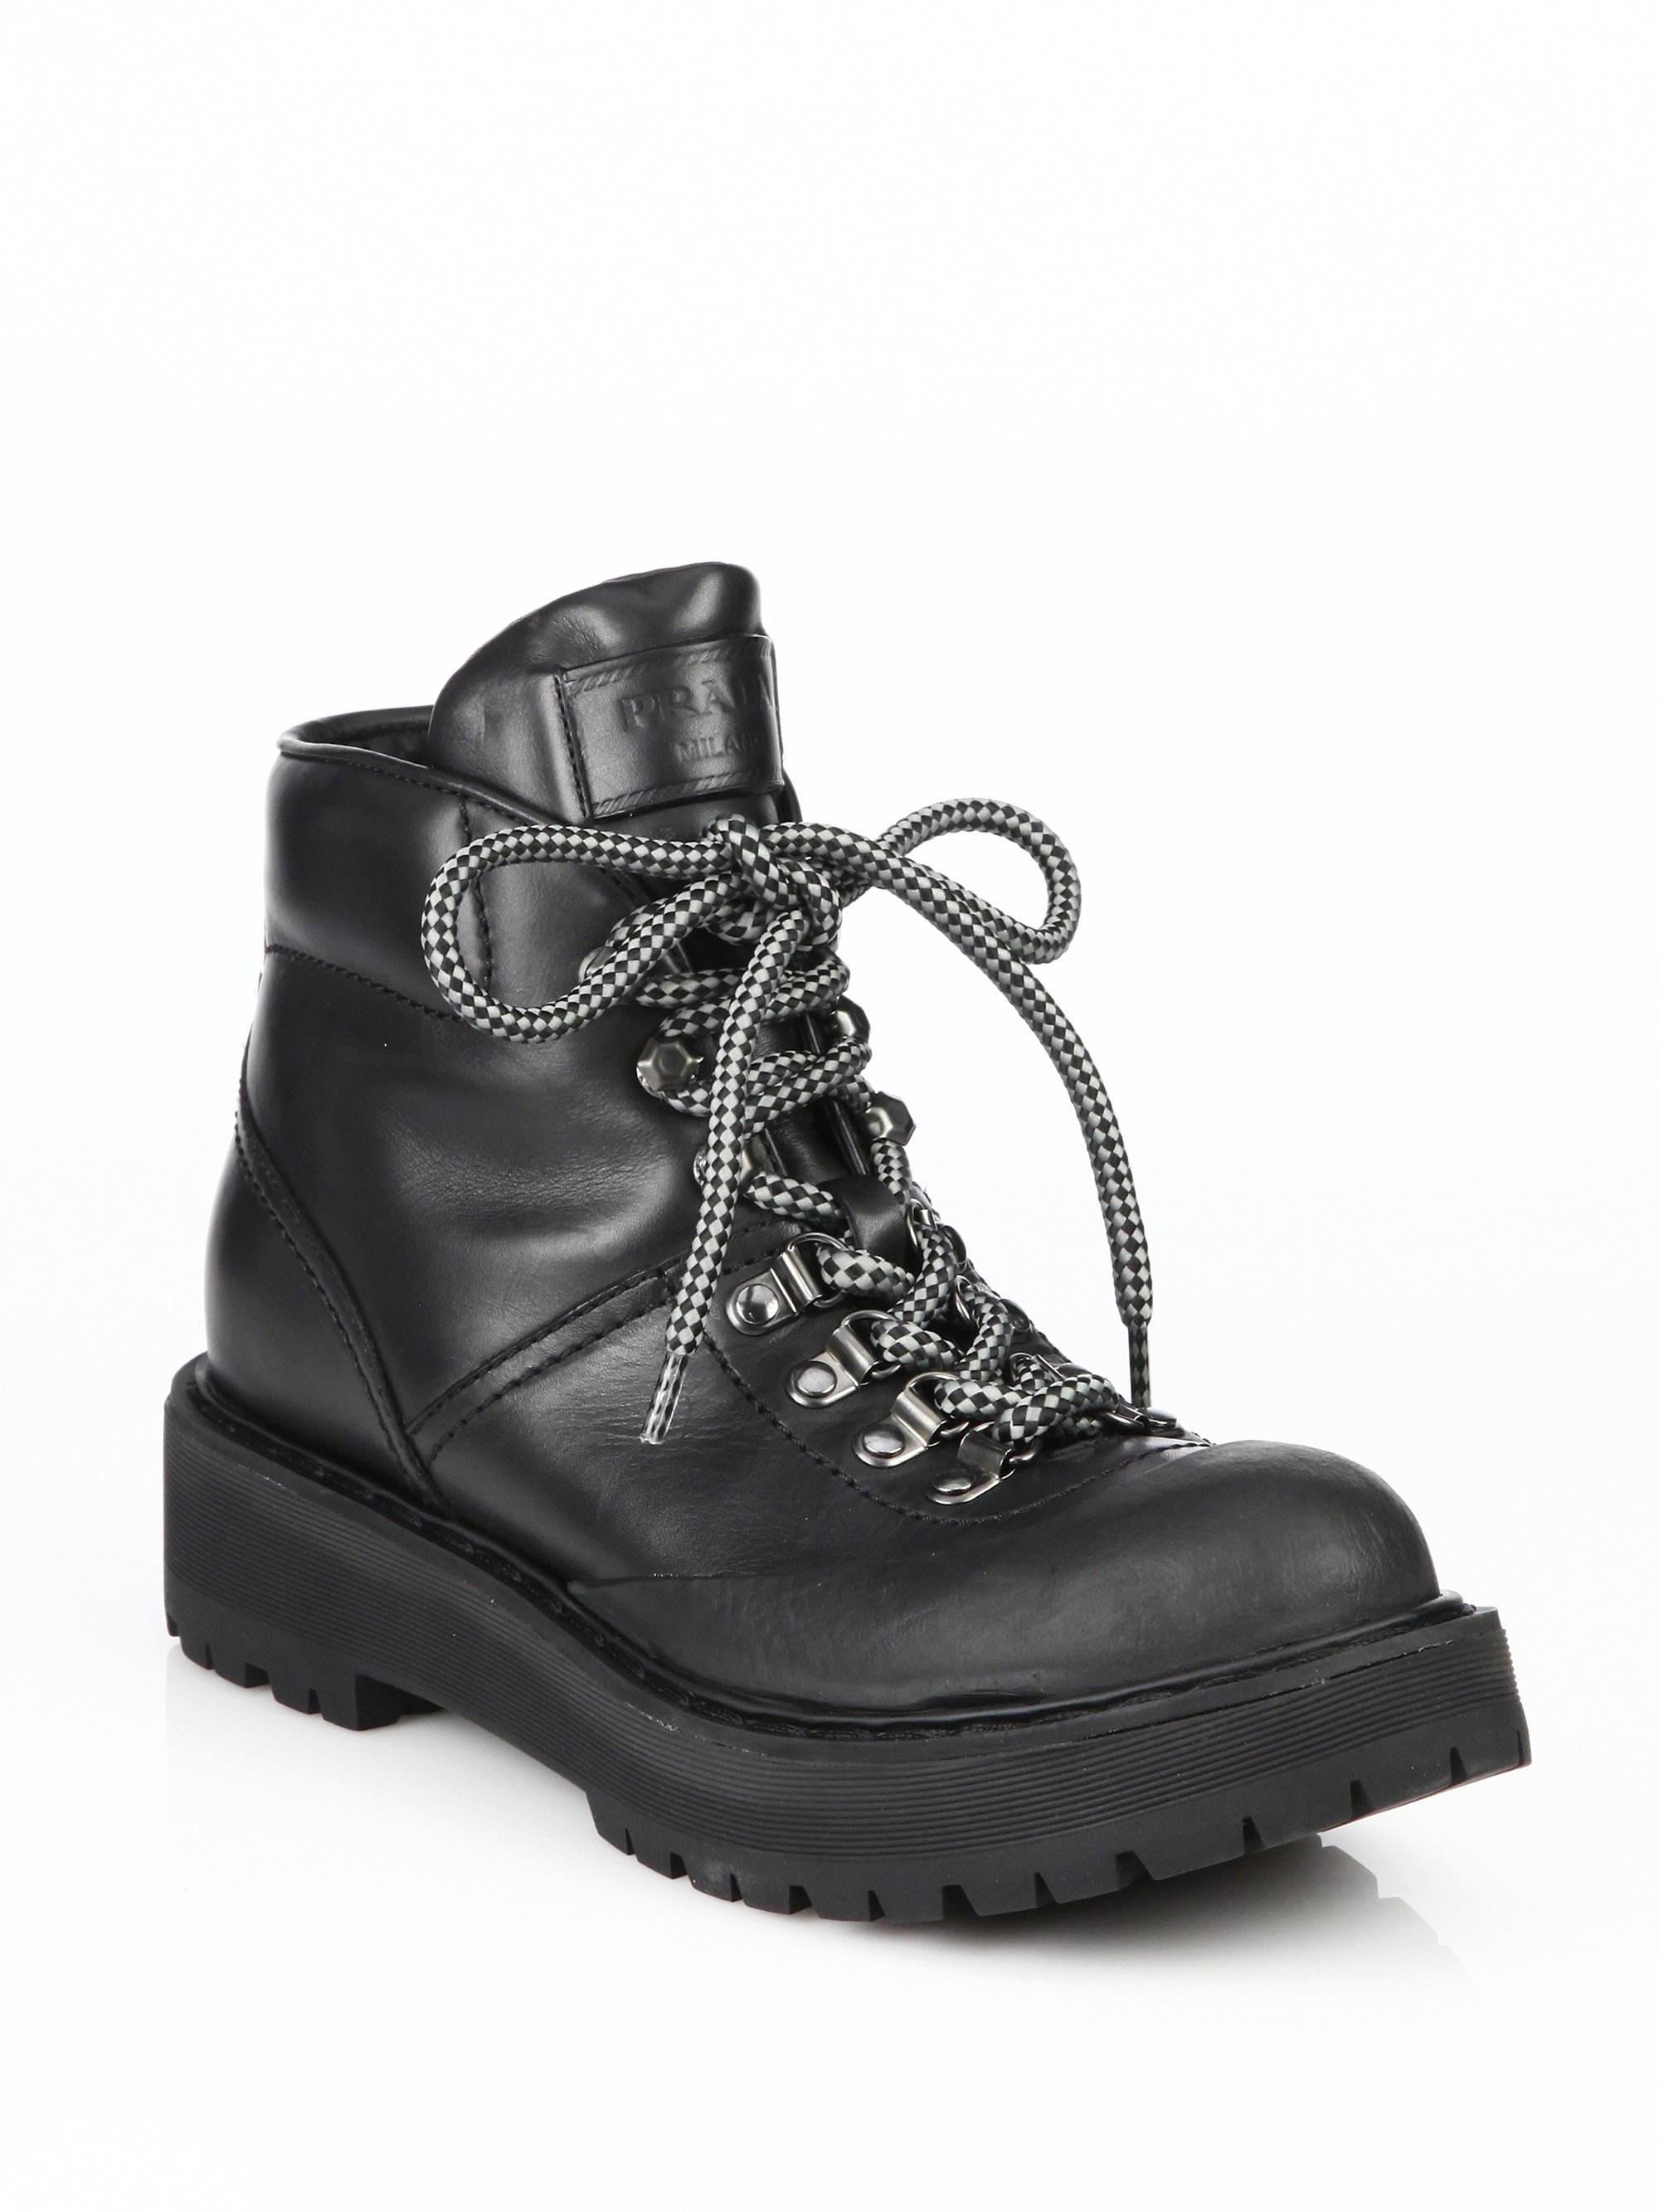 Prada Leather Lace-up Hiking Boots in 